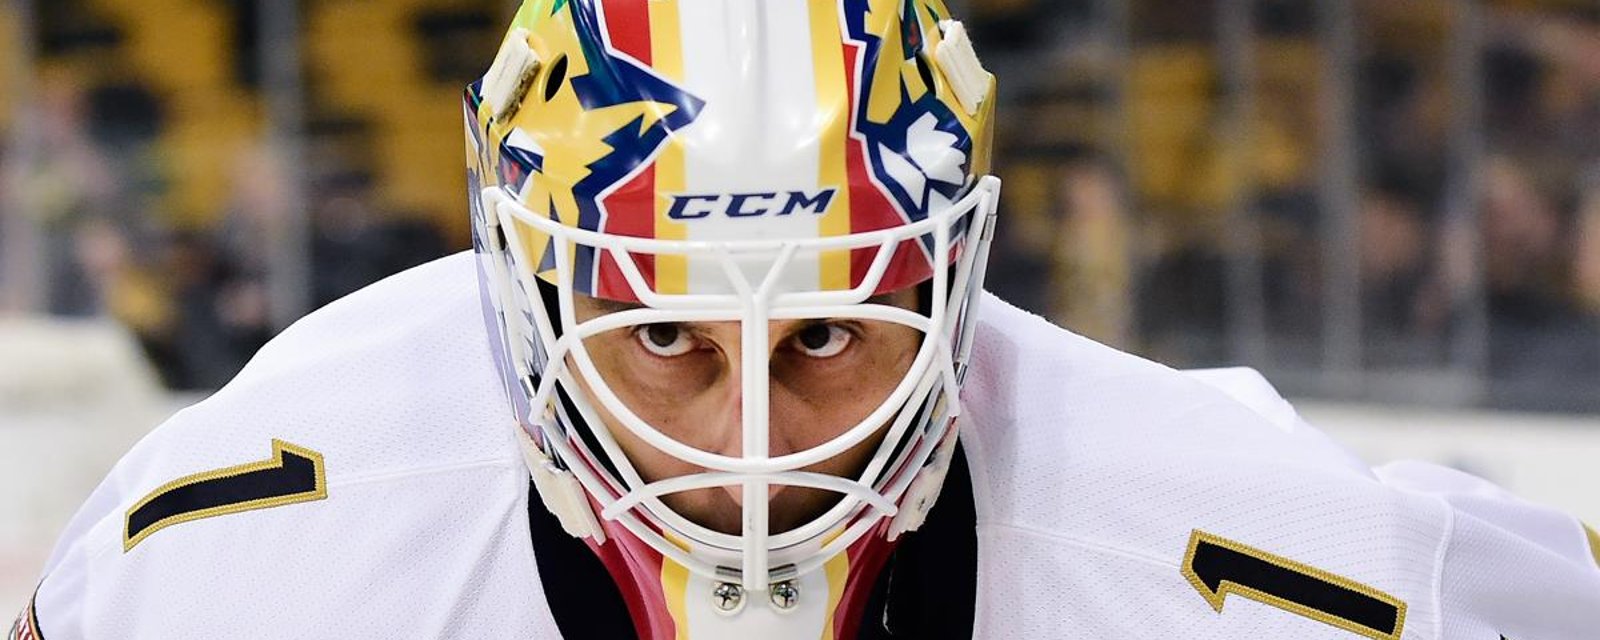 Roberto Luongo reacts to The Masters winner in hilarious way. 